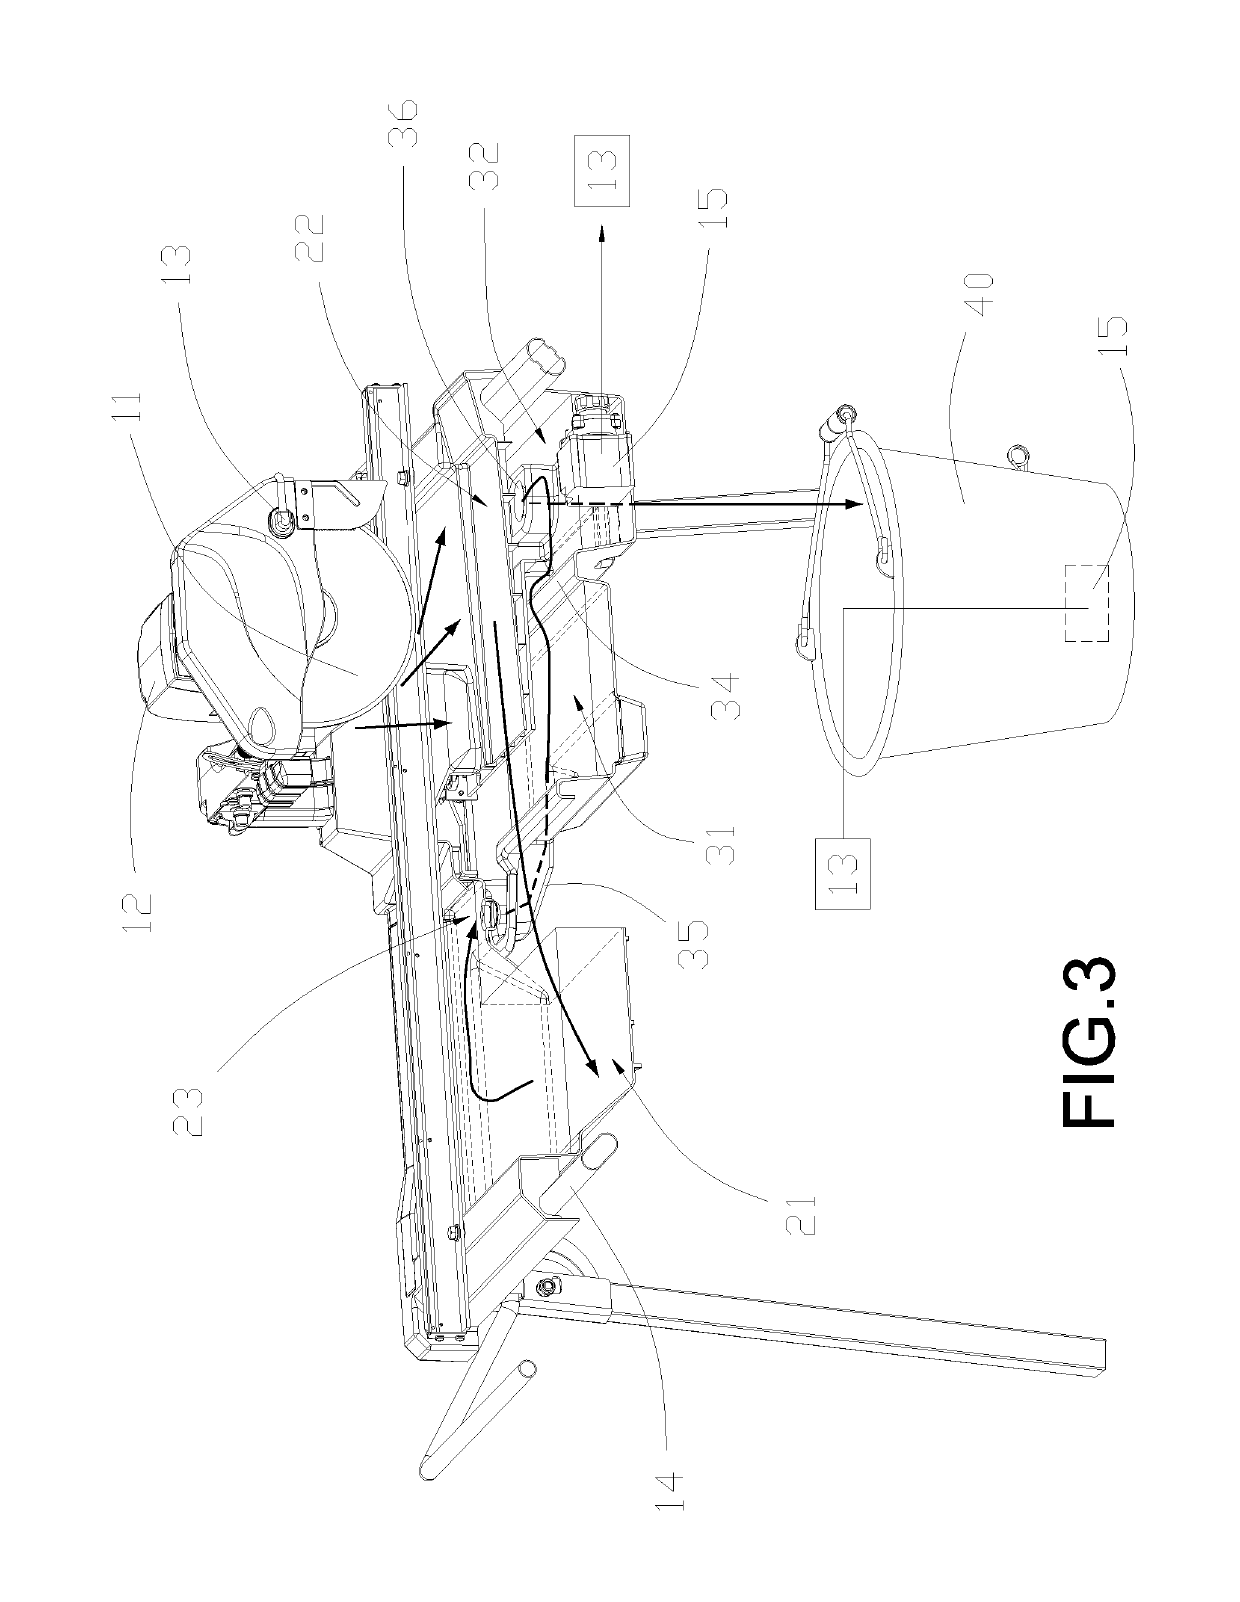 Method and System of Rivering Filtration for Power Saw Machine